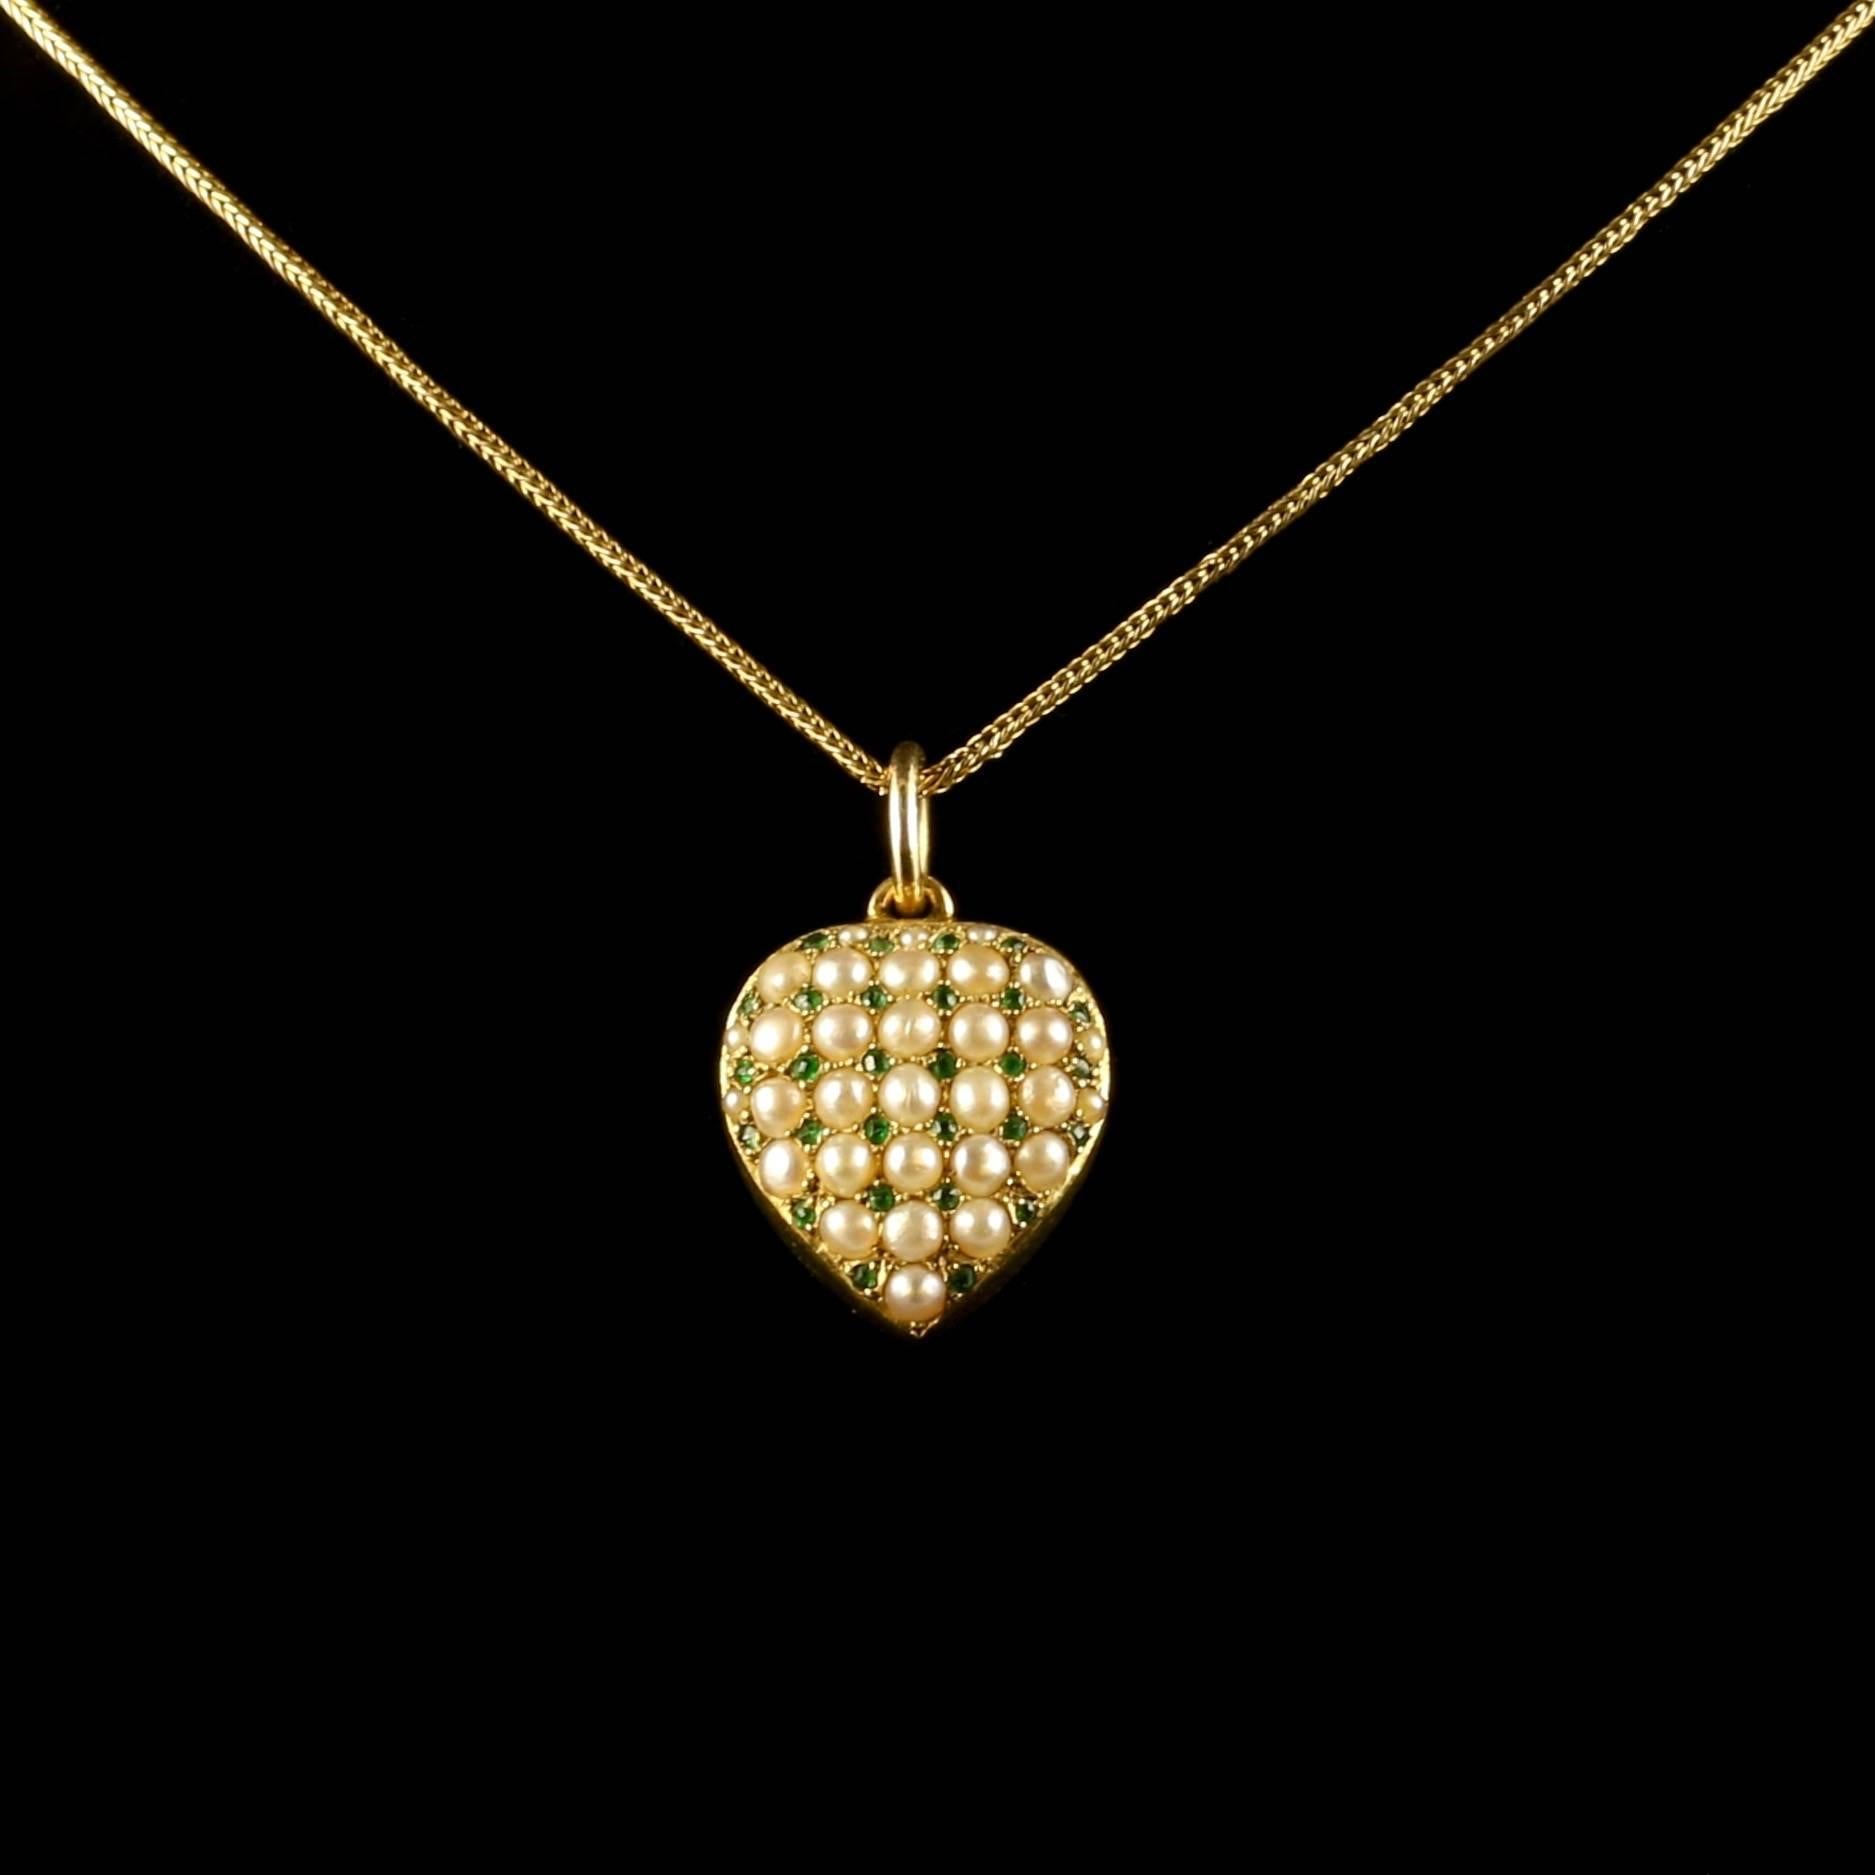 This fabulous Antique Victorian 18ct yellow gold locket and chain is outstanding.

Circa 1880.

A beautiful heart encrusted with natural pearls that compliment rich, green emeralds.

The fine chain is 18ct gold and goes beautifully with the stunning